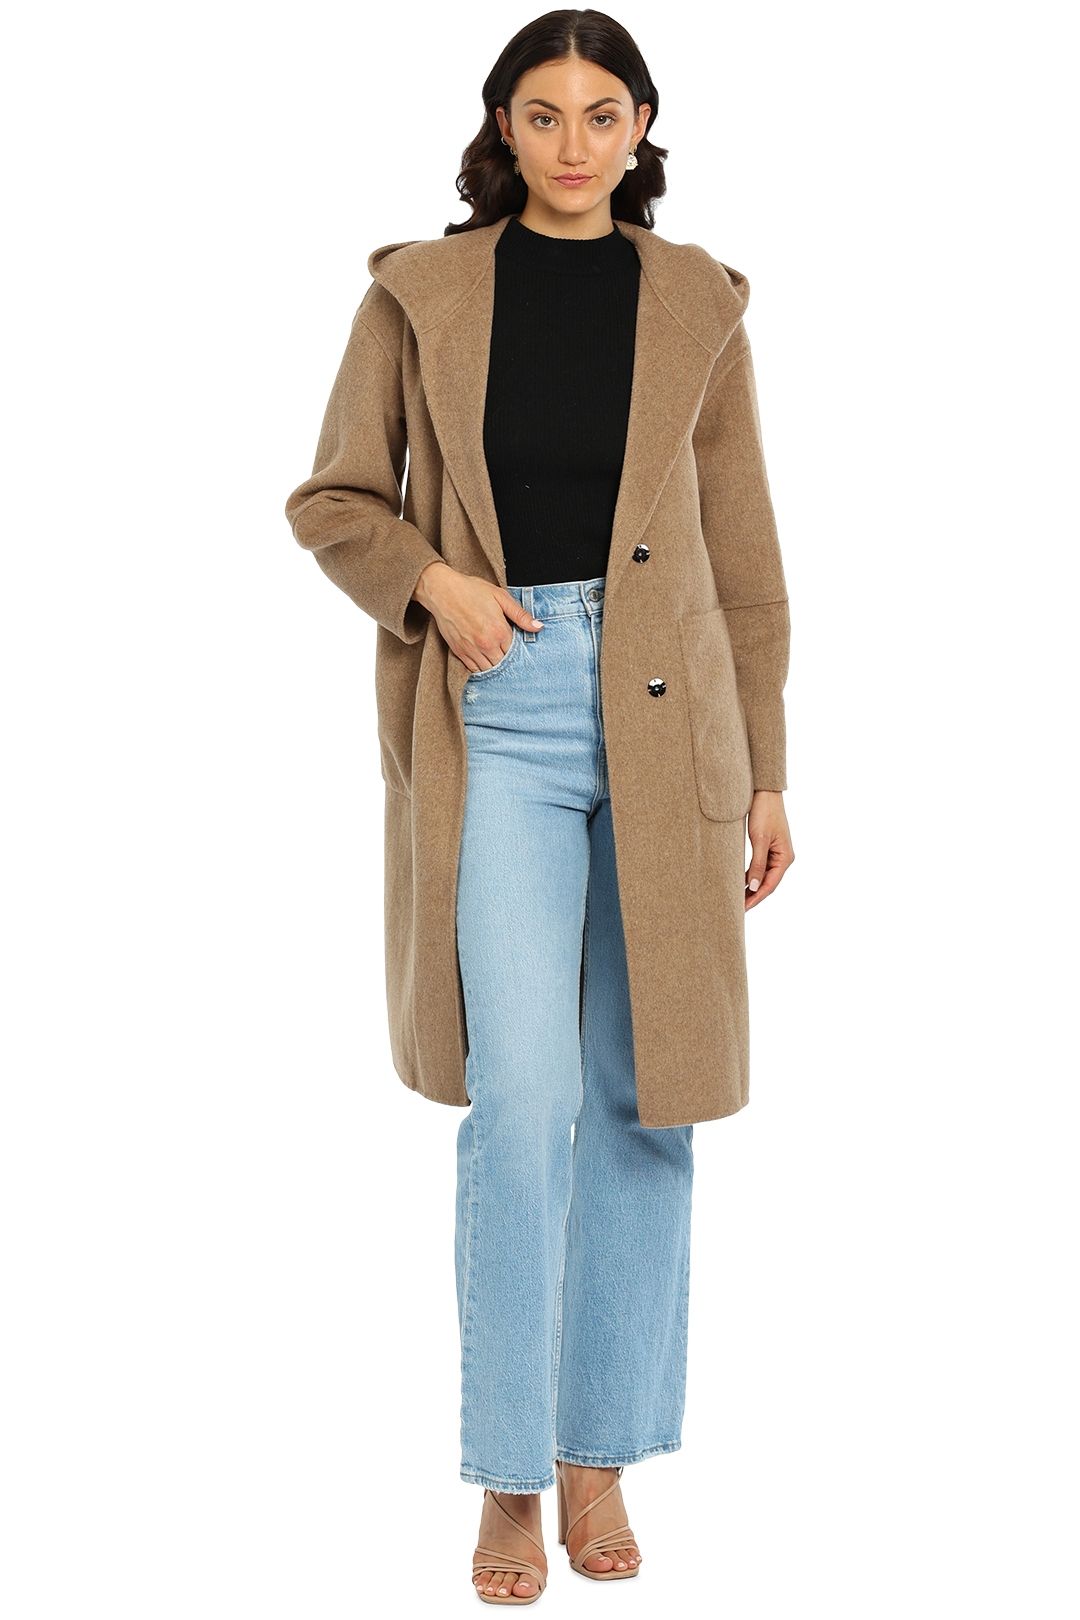 Belle and BloomWalk This Way Coat Oat